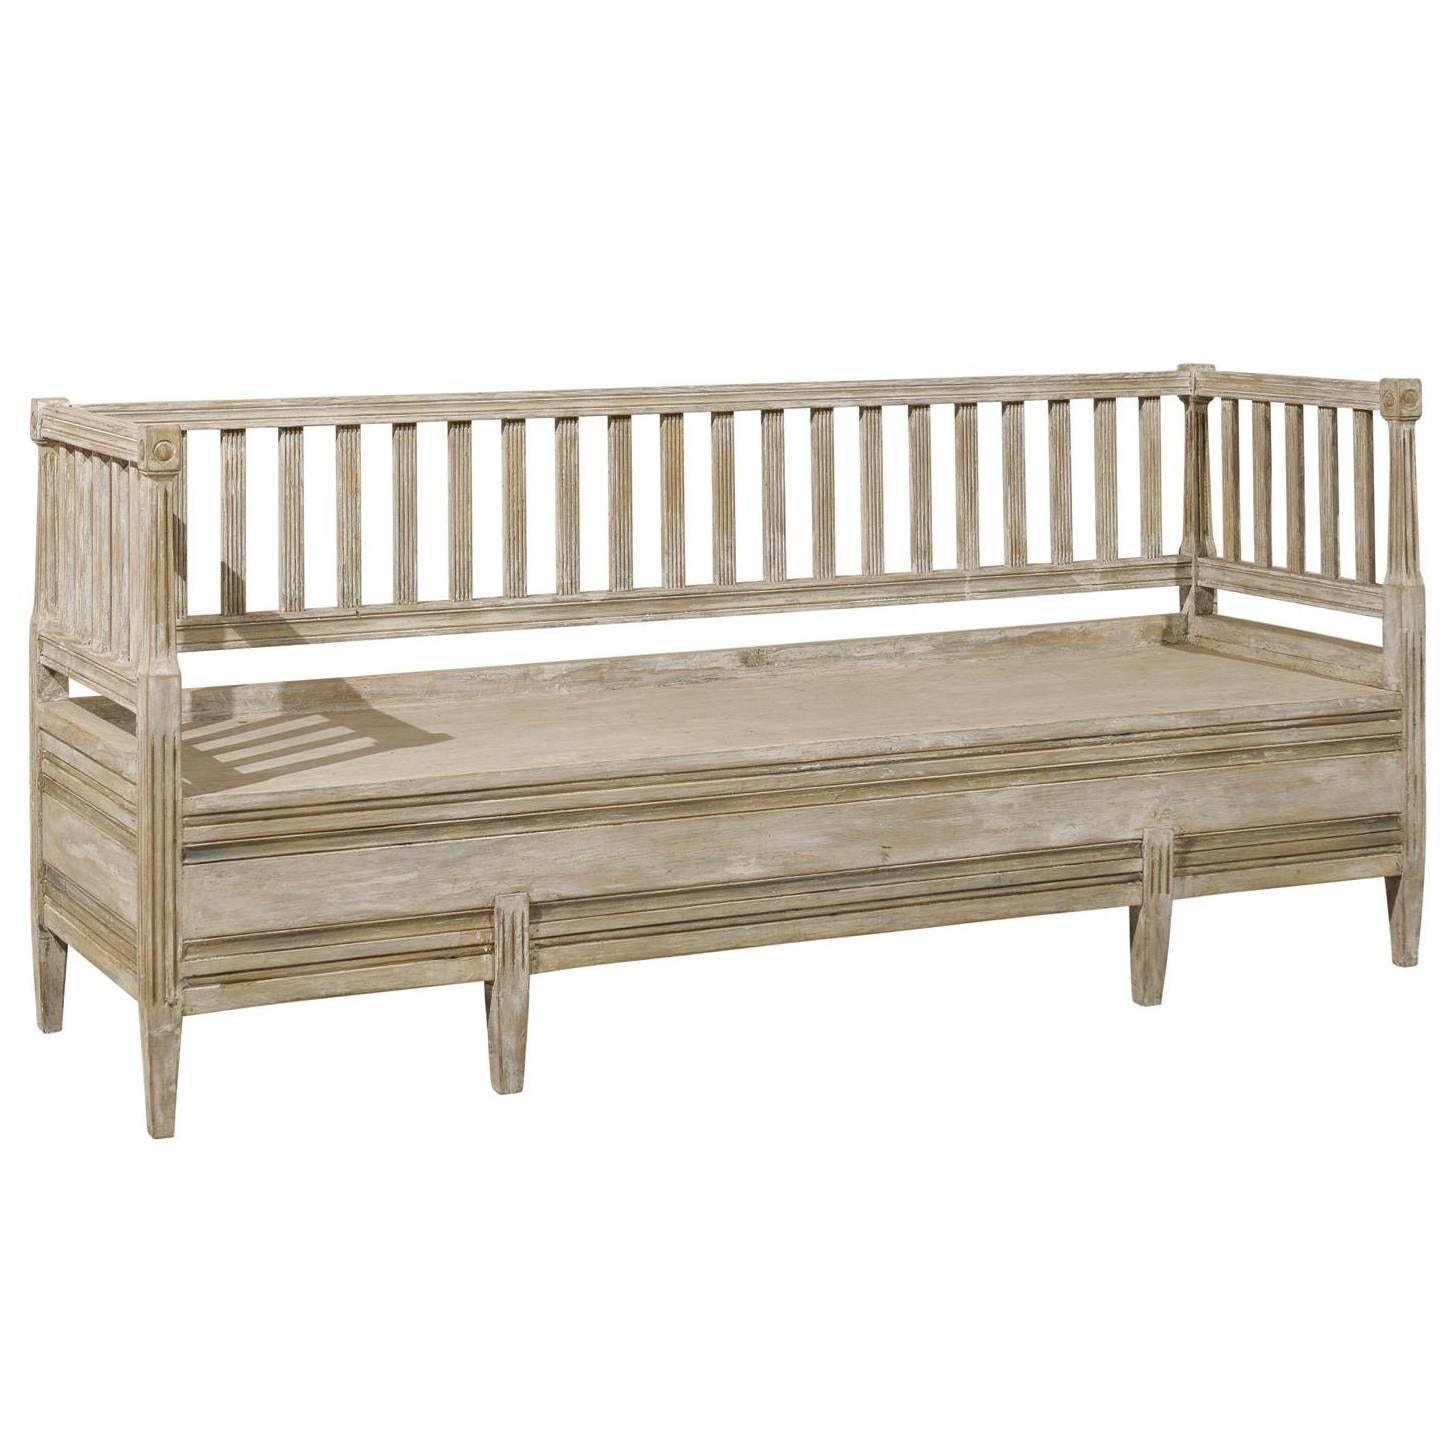 A Swedish Late Gustavian Period Sofa Bench from the 19th Century with Back Slats